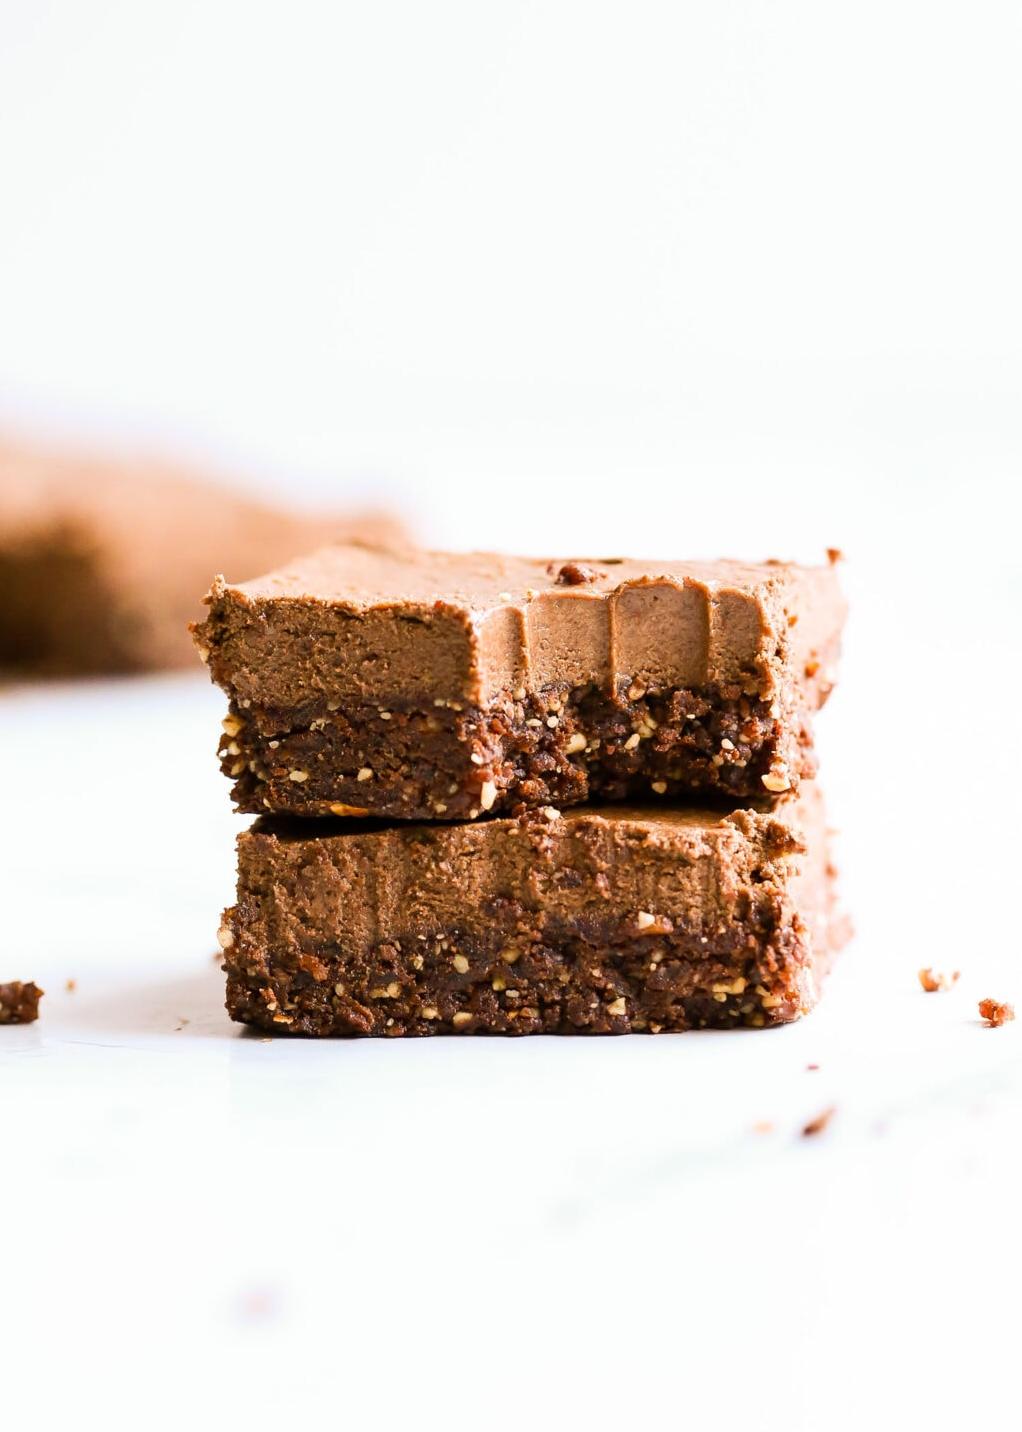  This isn't your grandma's brownie recipe, this is Mocha Mousse Brownies!